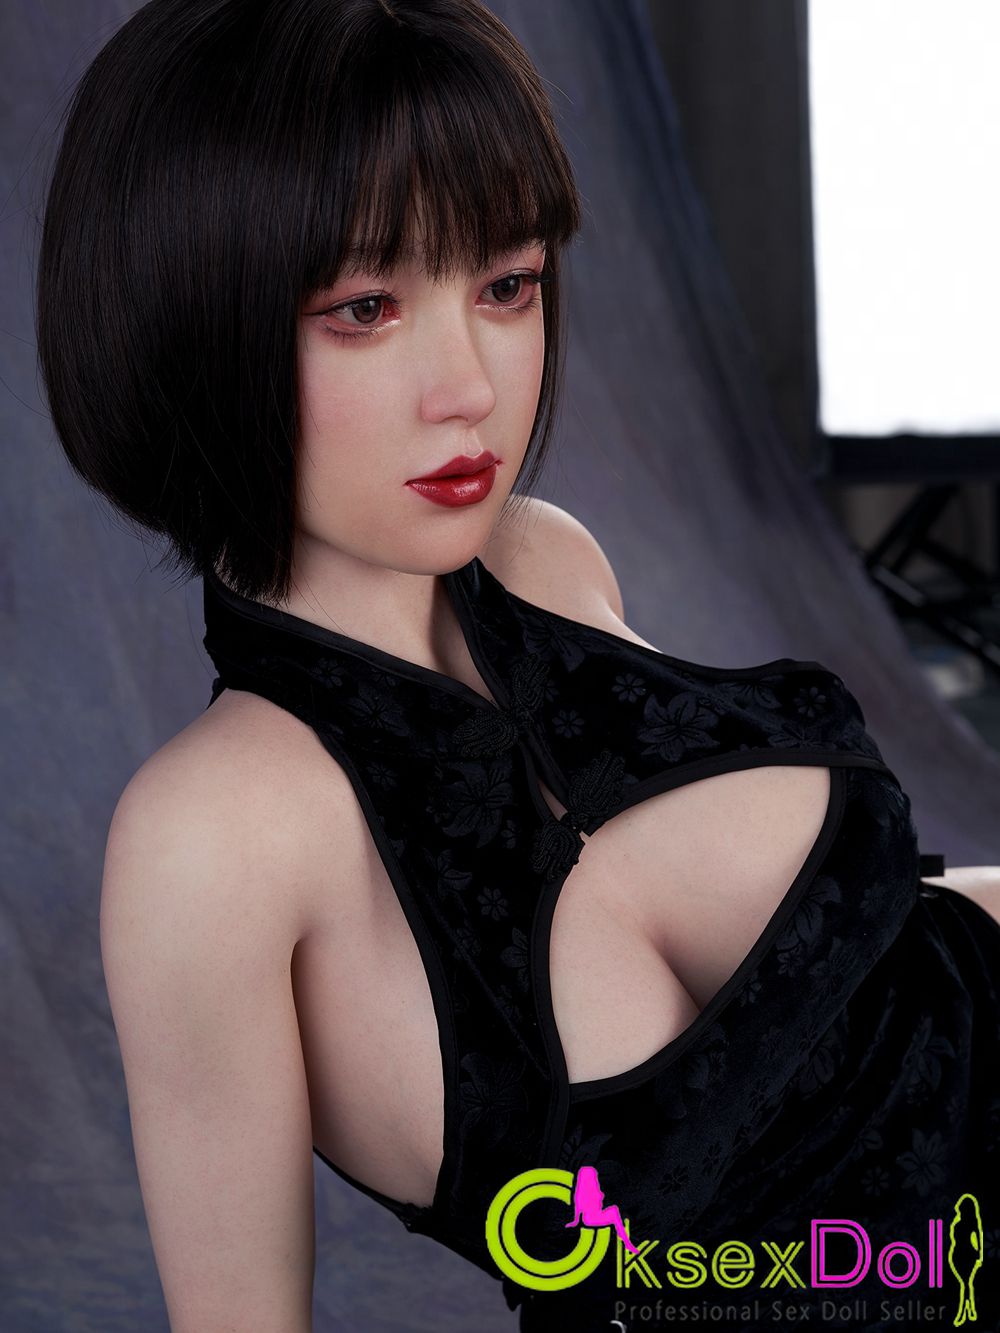 WAX doll Images